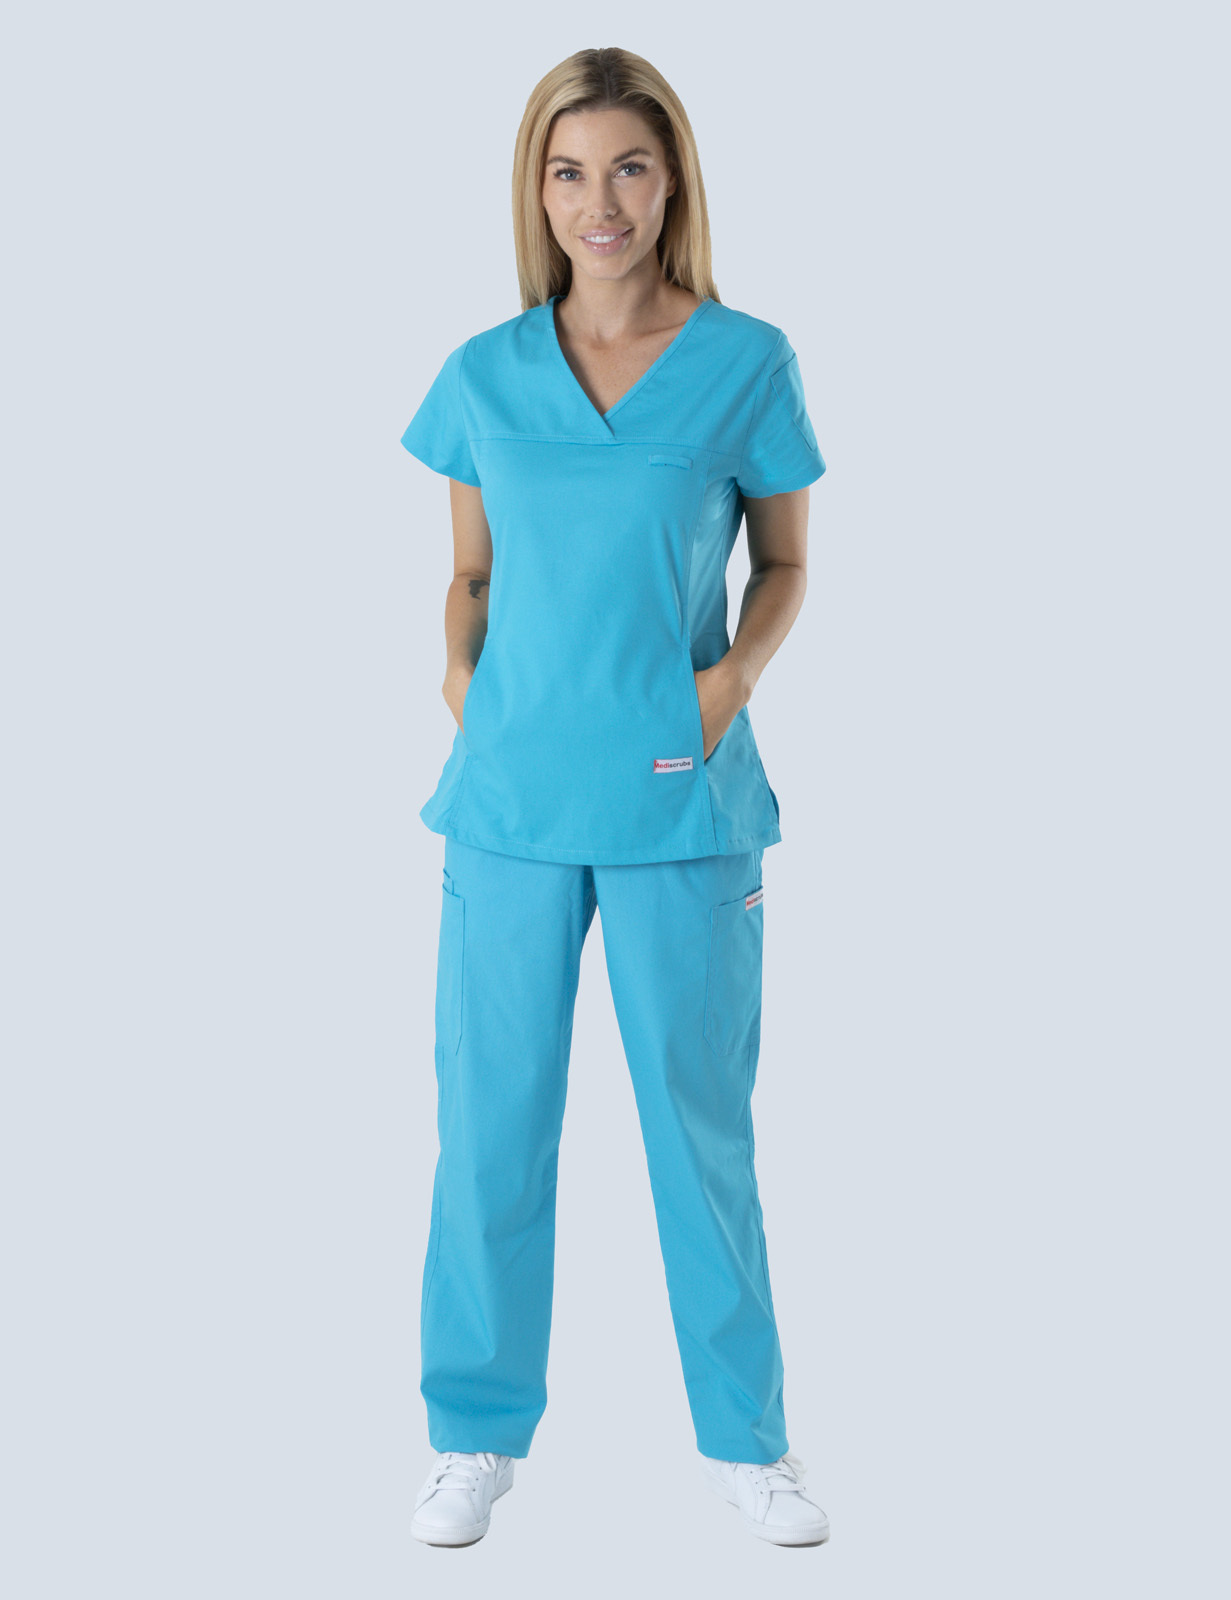 Nambour Hospital - Enrolled Nurse (Women's Fit Solid Scrub Top and Cargo Pants in Aqua incl Logos)